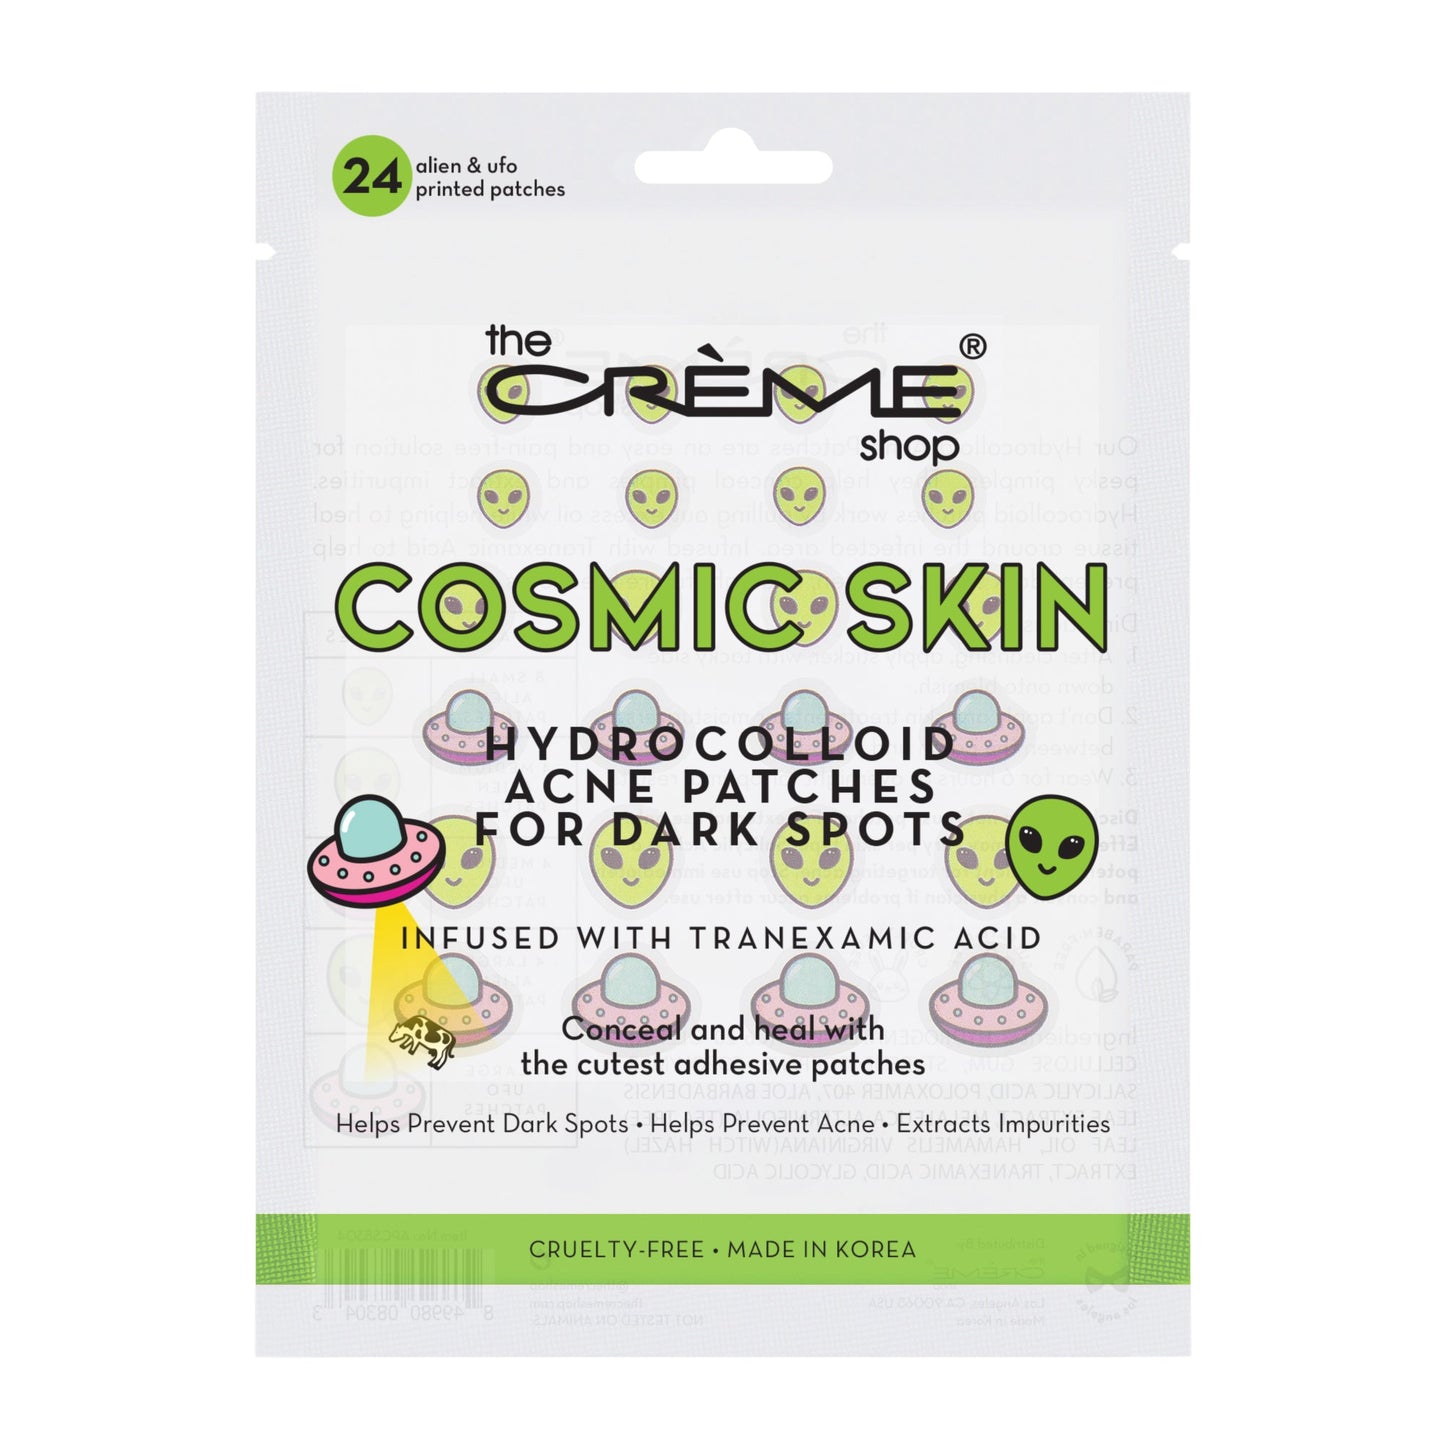 Cosmic Skin - Hydrocolloid Acne Patches | Infused with Tranexamic Acid Hydrocolloid Acne Patches The Crème Shop Single 